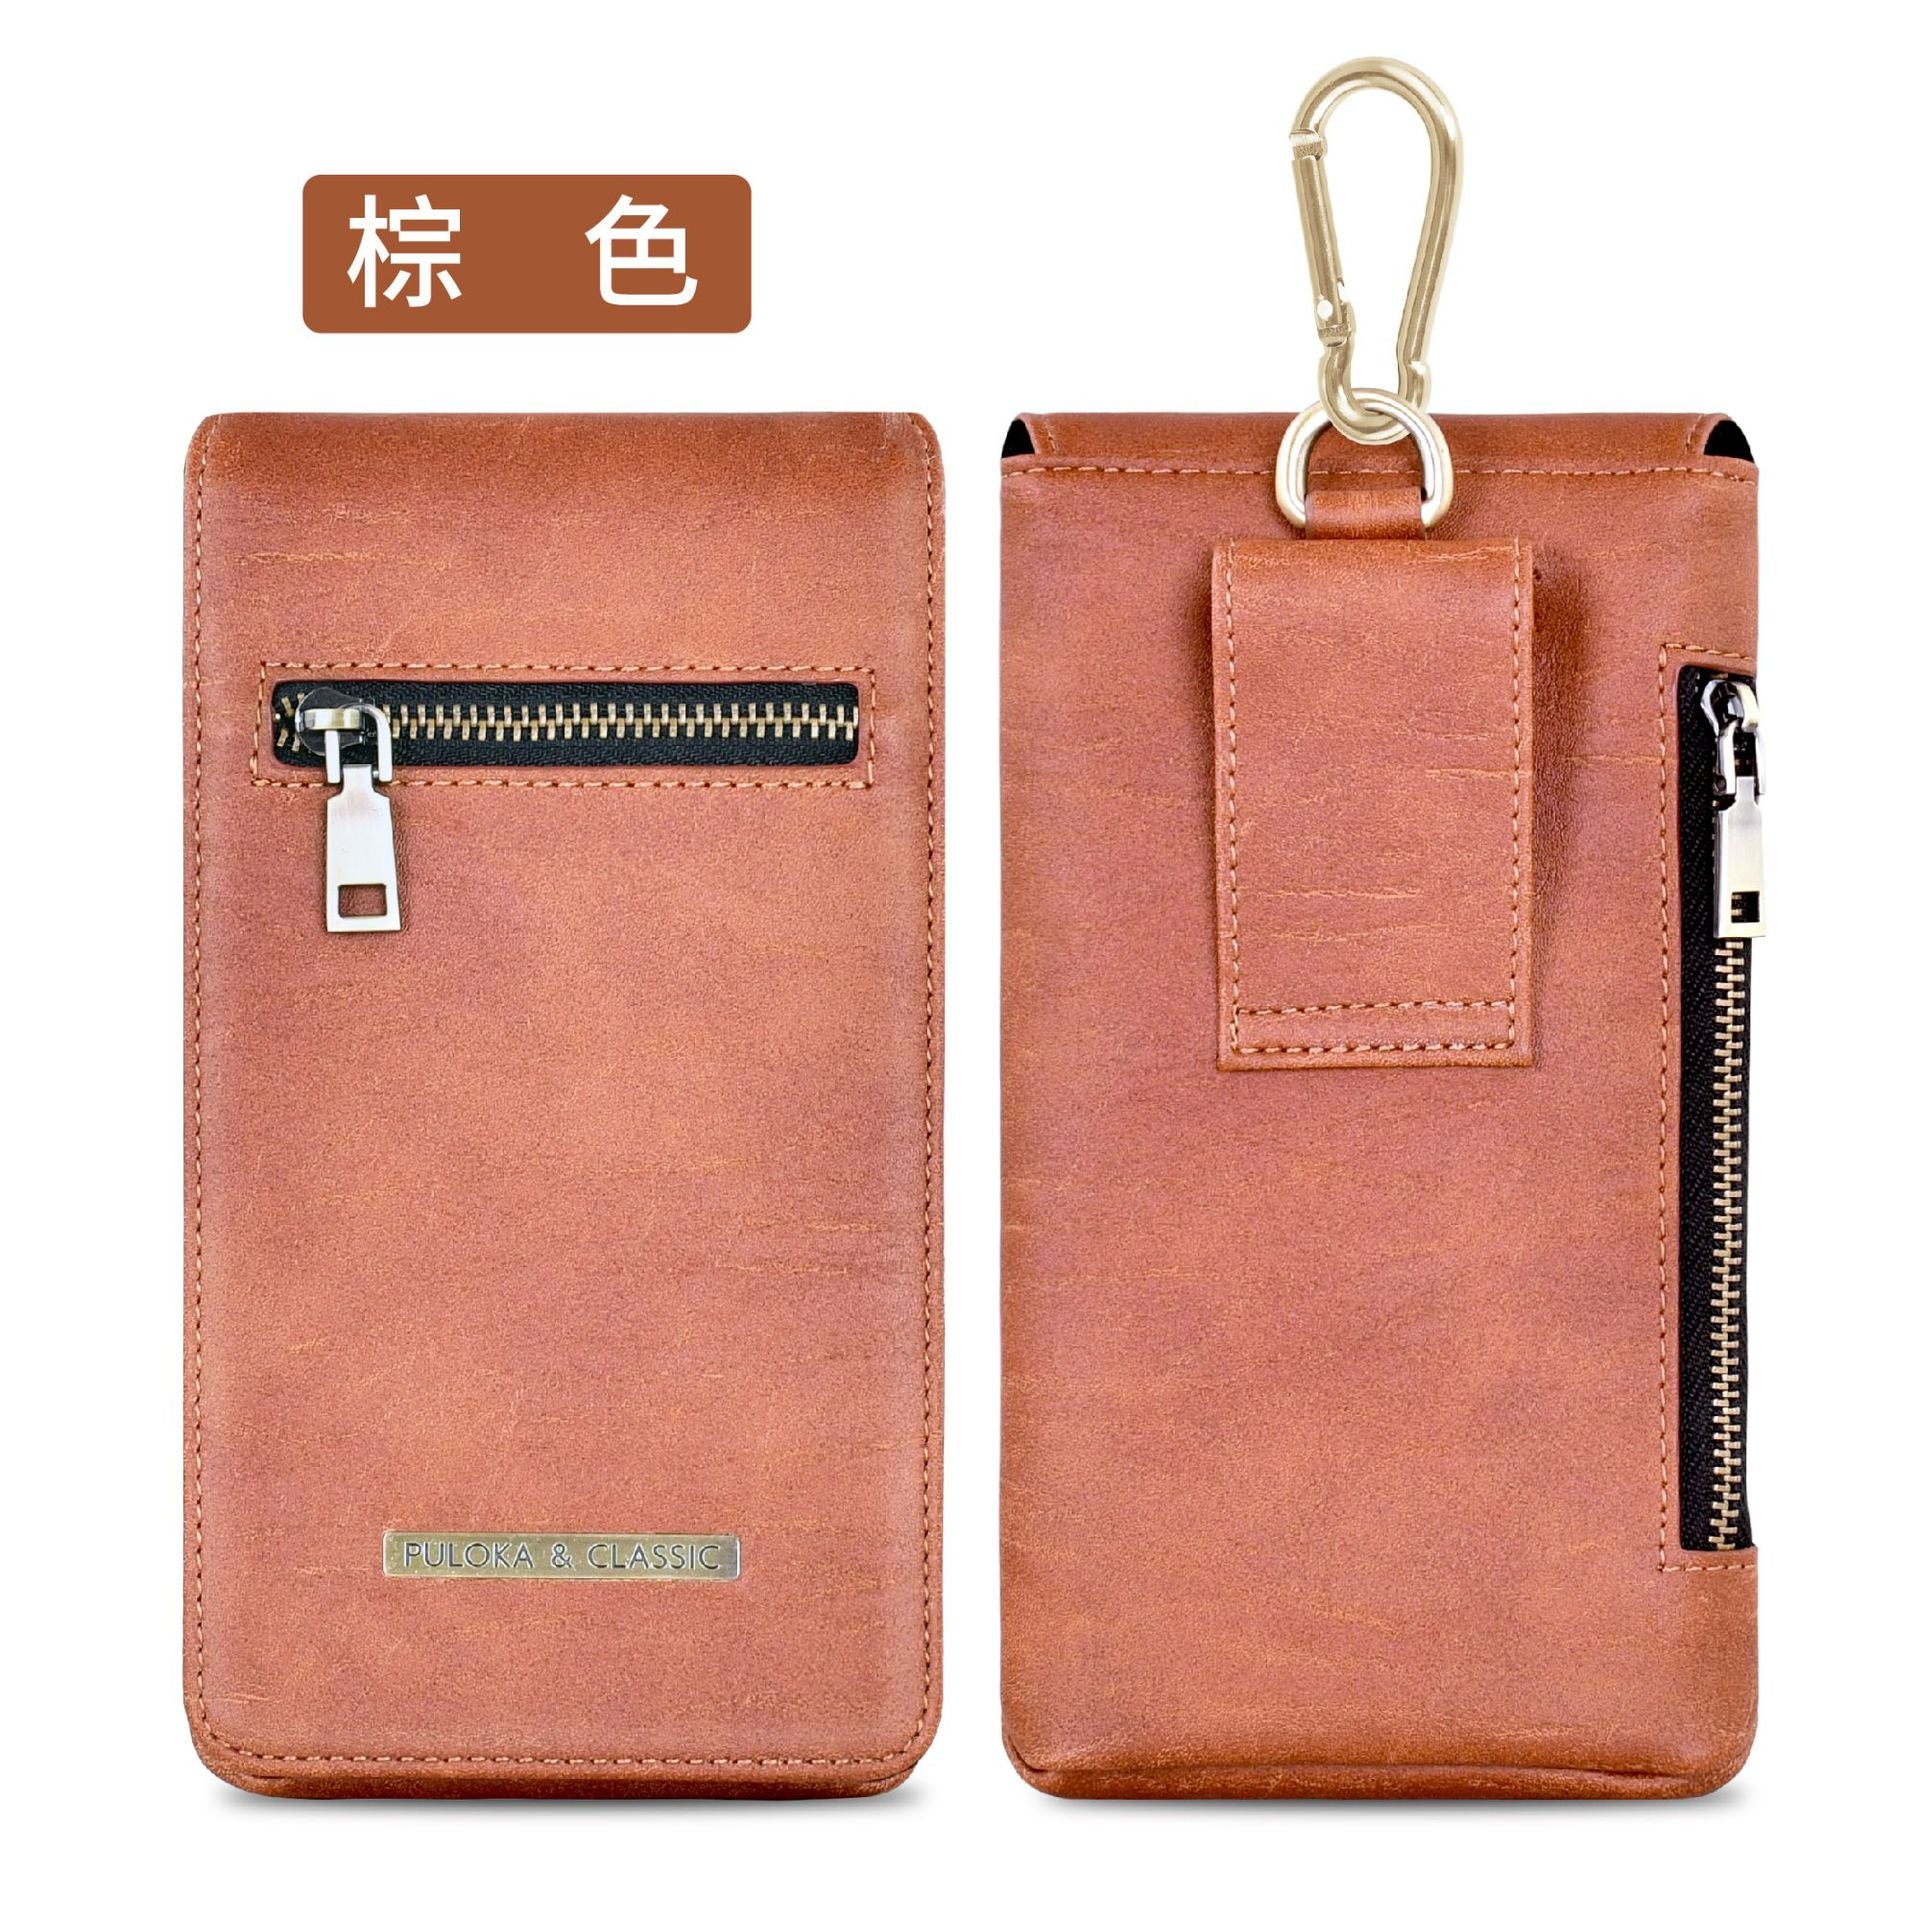 iPhone 12 Genuine Leather Belt Clip Holster Pouch Hengwin Phone Case - Magnetic Closure Purse Belt Loop Pouch Bag - 380230 6.5 inch / Brown / China Find Epic Store